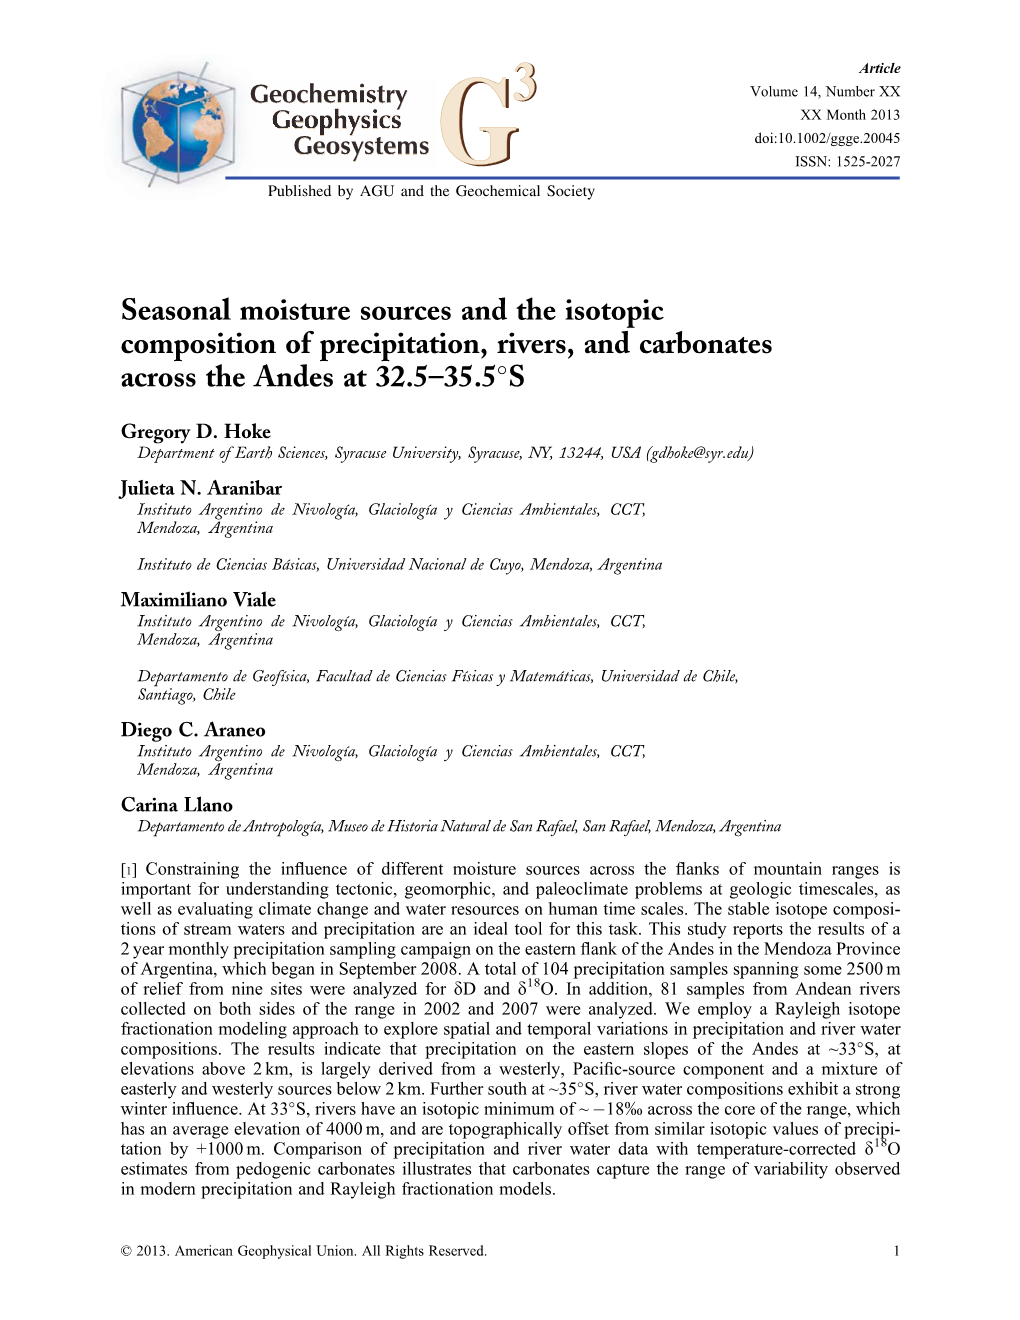 Seasonal Moisture Sources and the Isotopic Composition of Precipitation, Rivers, and Carbonates Across the Andes at 32.5–35.5S